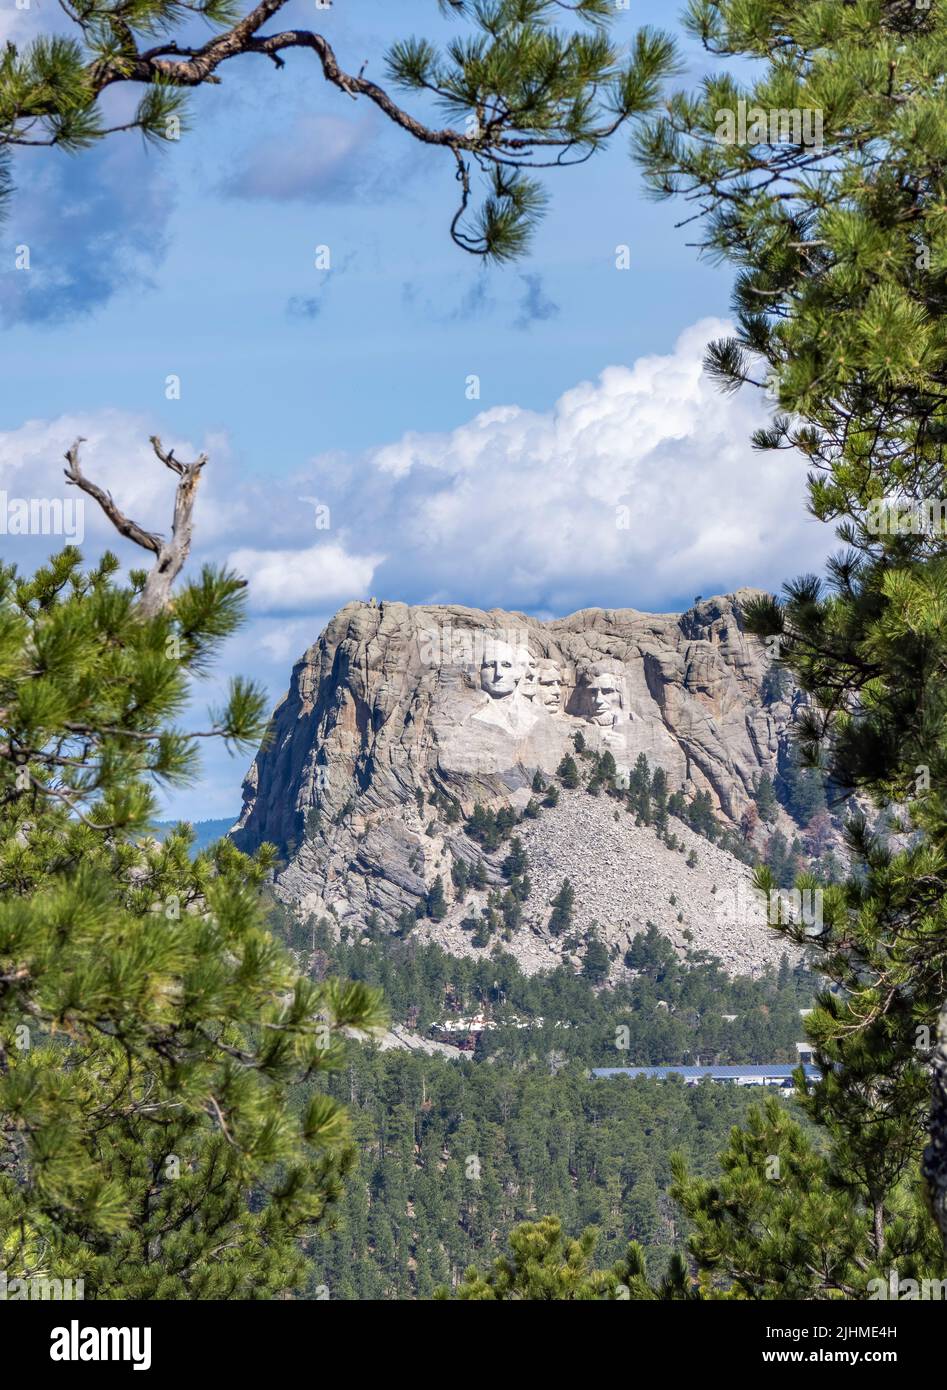 Mount Rushmore National Memorial from the Peter Norbeck Overlook on Iron Mountain Road in the Black Hills of South Dakota USA Stock Photo